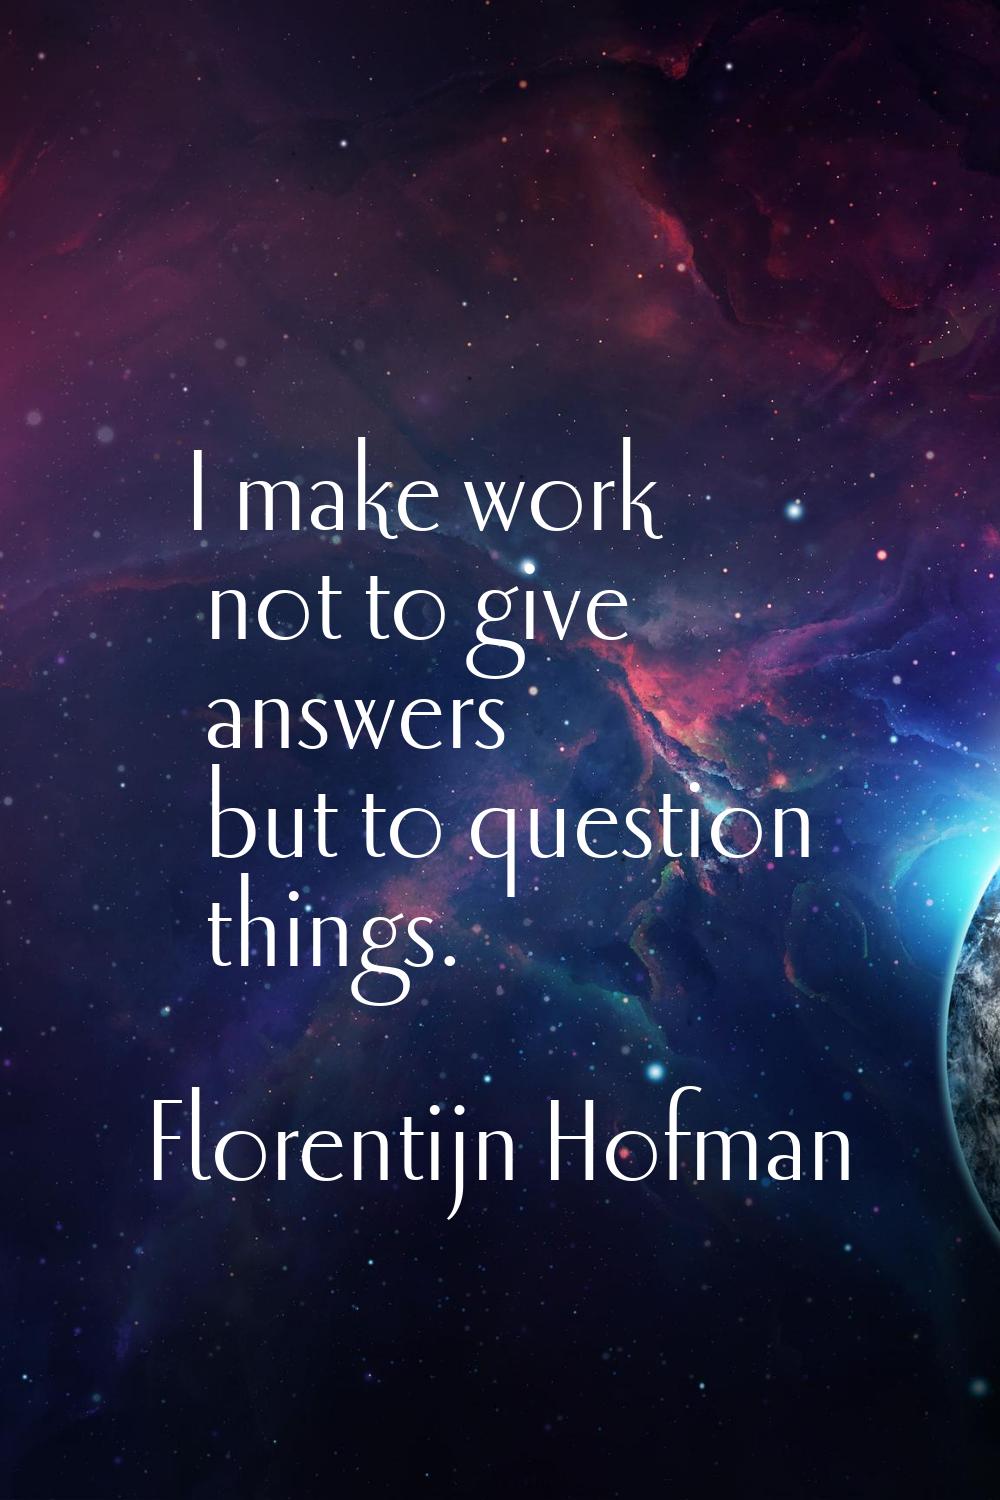 I make work not to give answers but to question things.